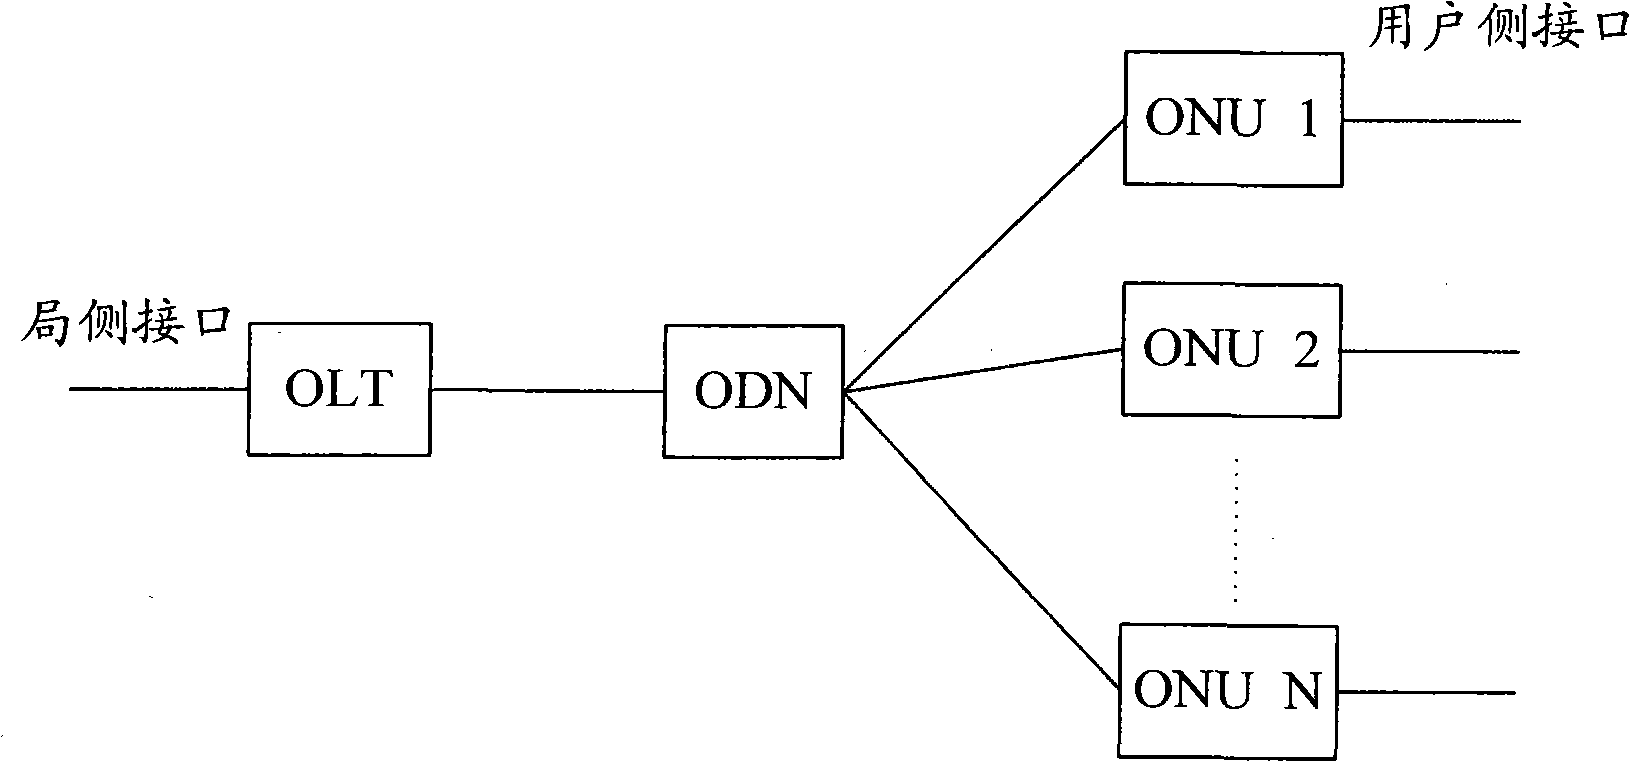 Online optical network unit (ONU) optical power acquisition device and method